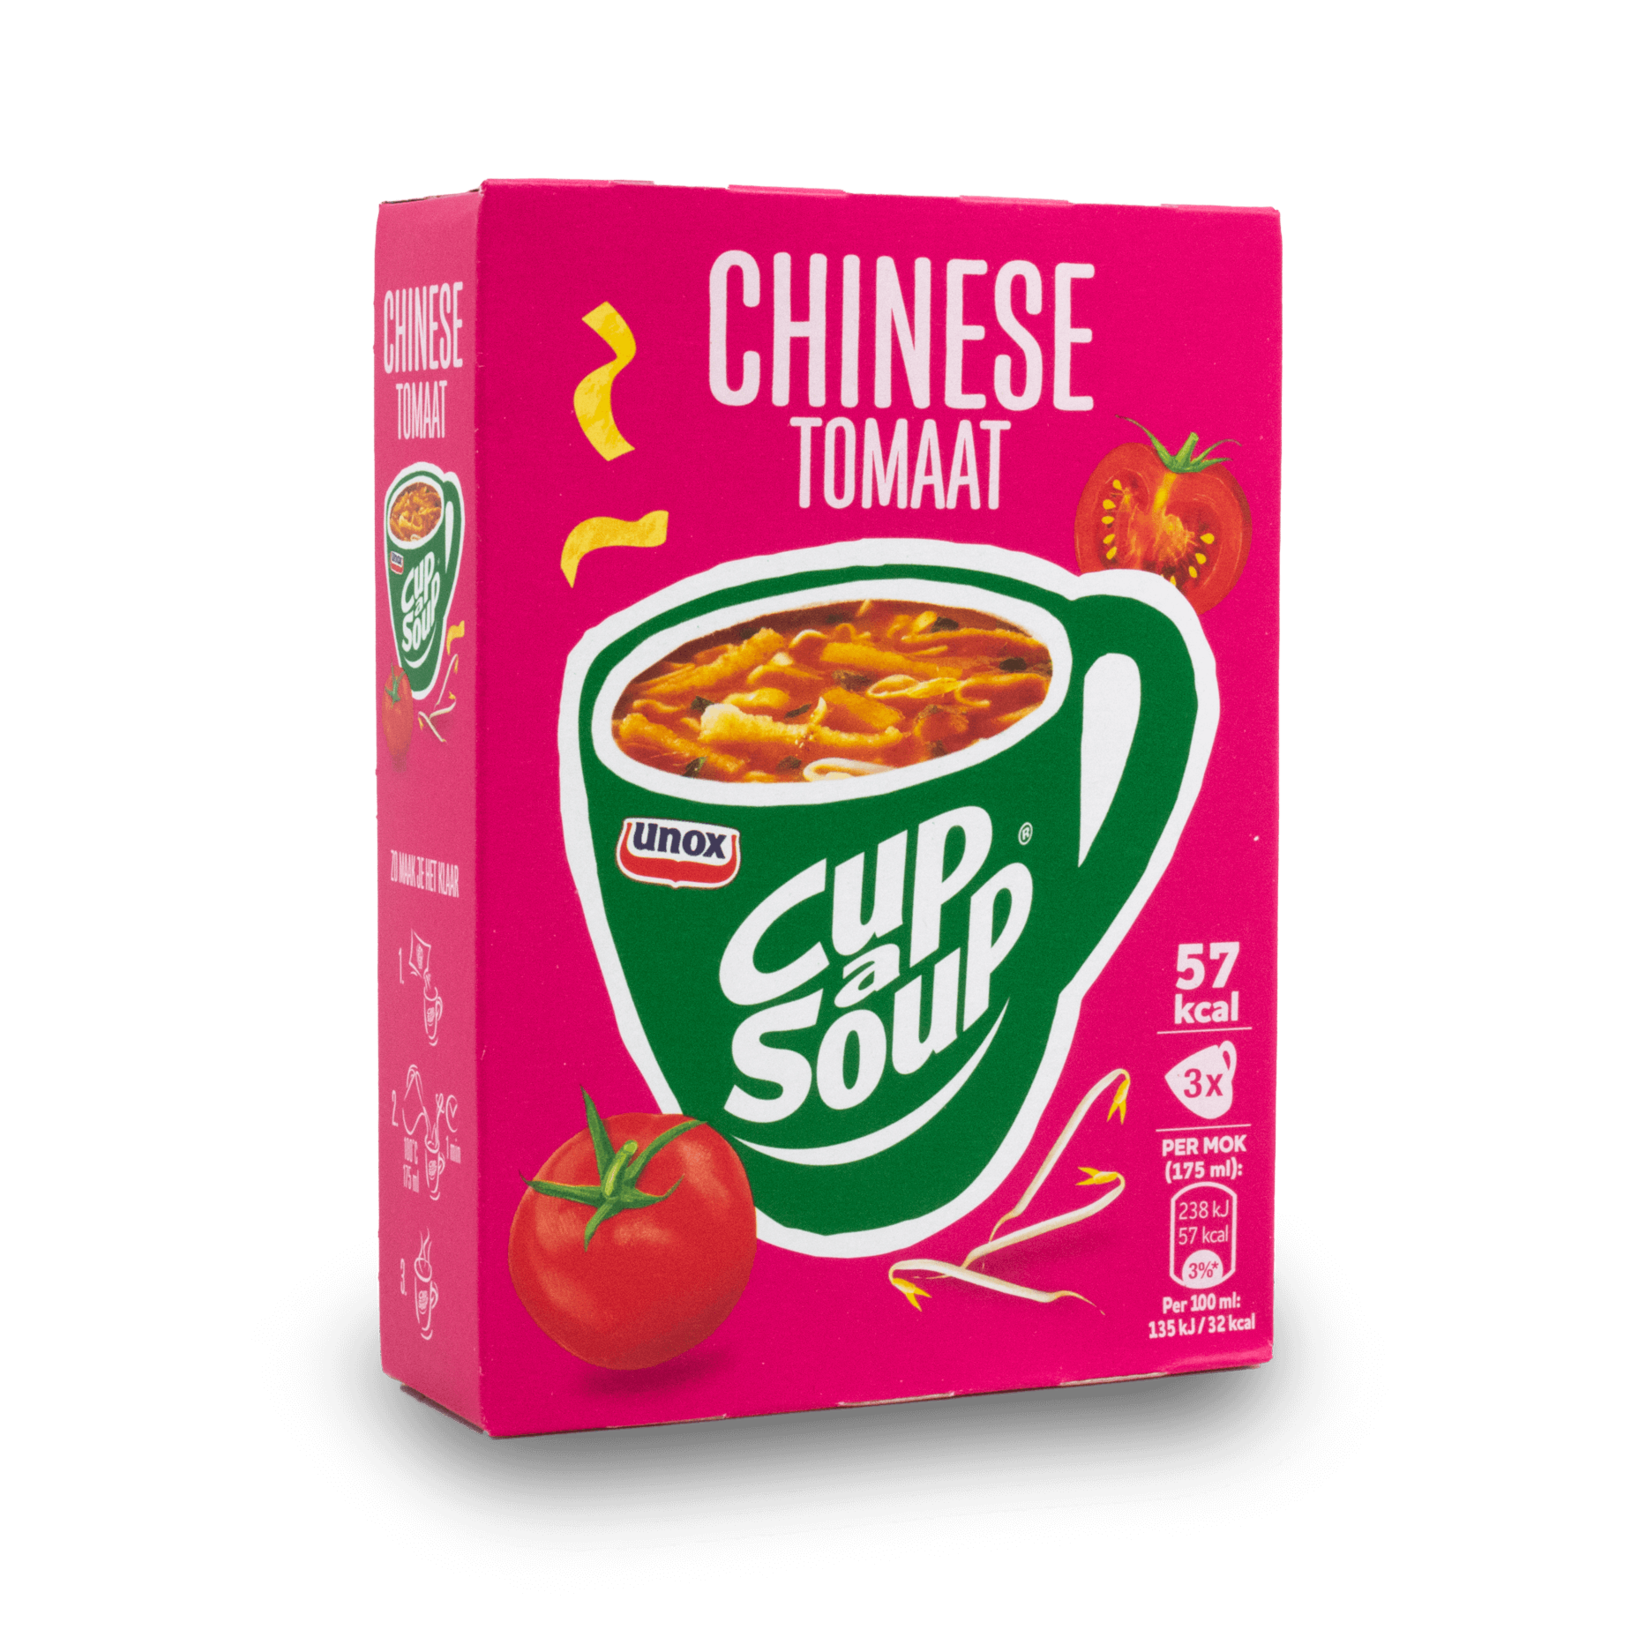 Unox Unox Cup a Soup - Chinese Tomato 3X18g